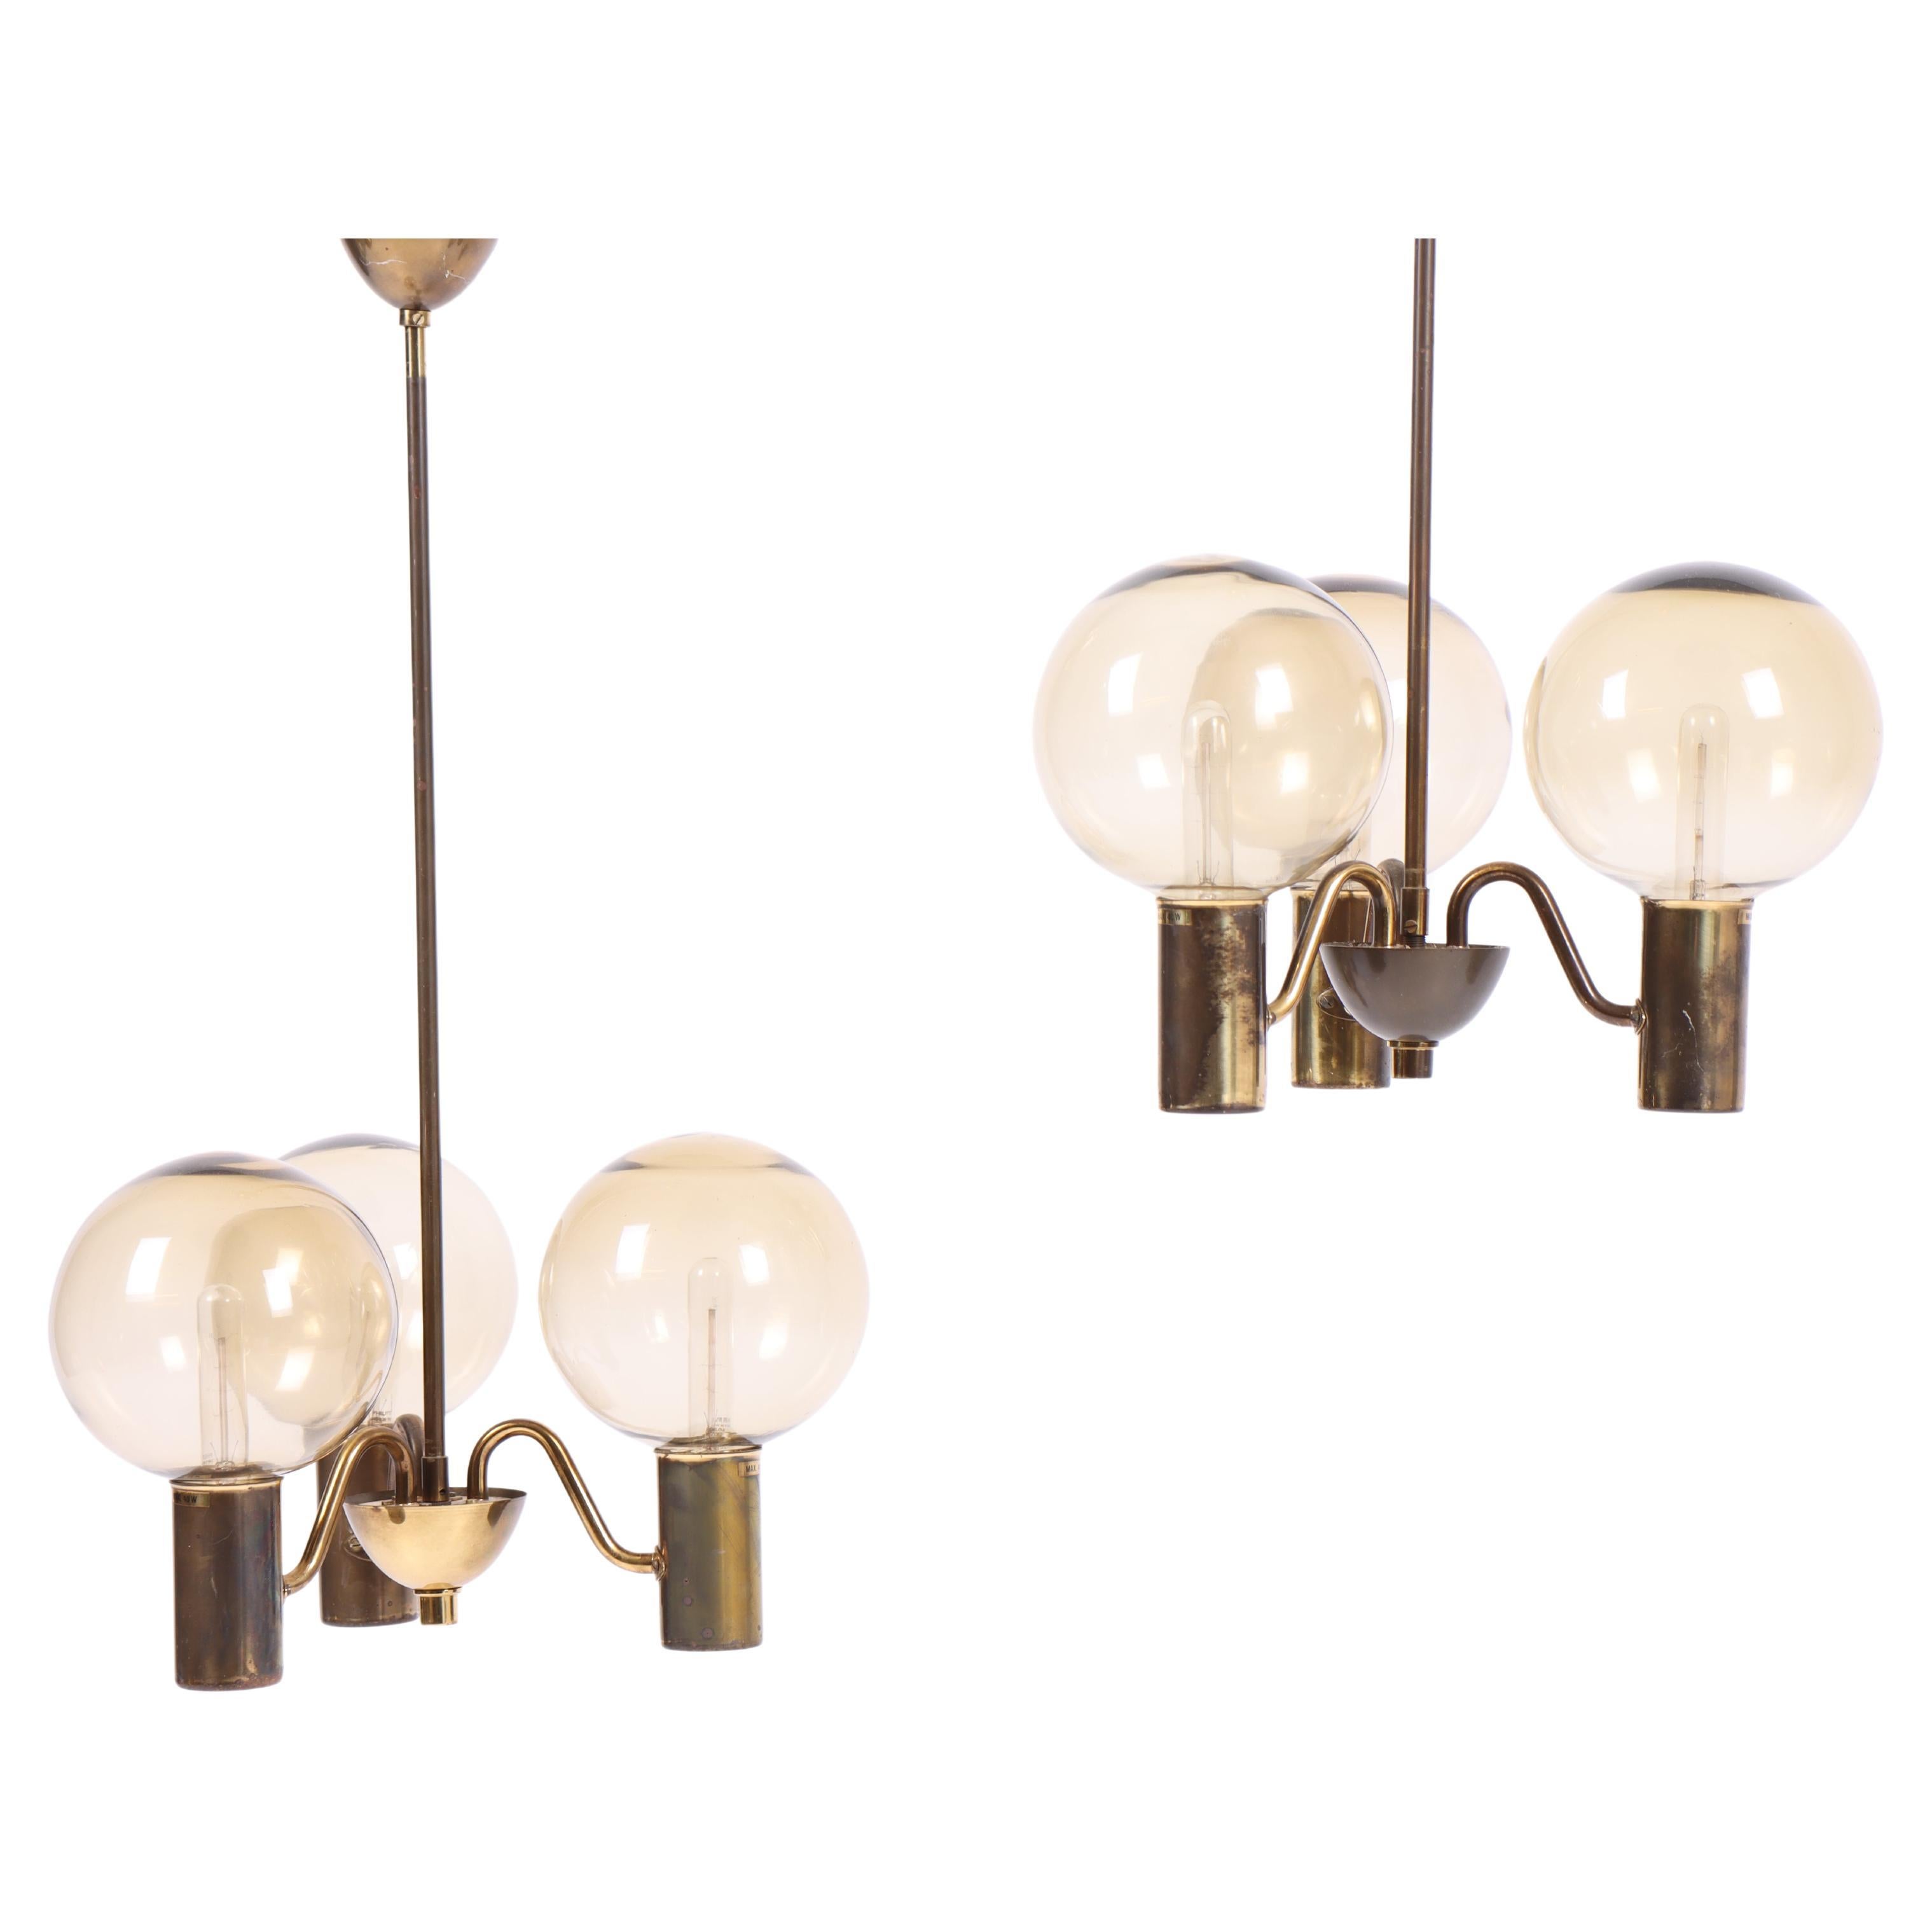 Pair of Midcentury "Patricia" Chandeliers by Hans-Agne Jakobsson For Sale